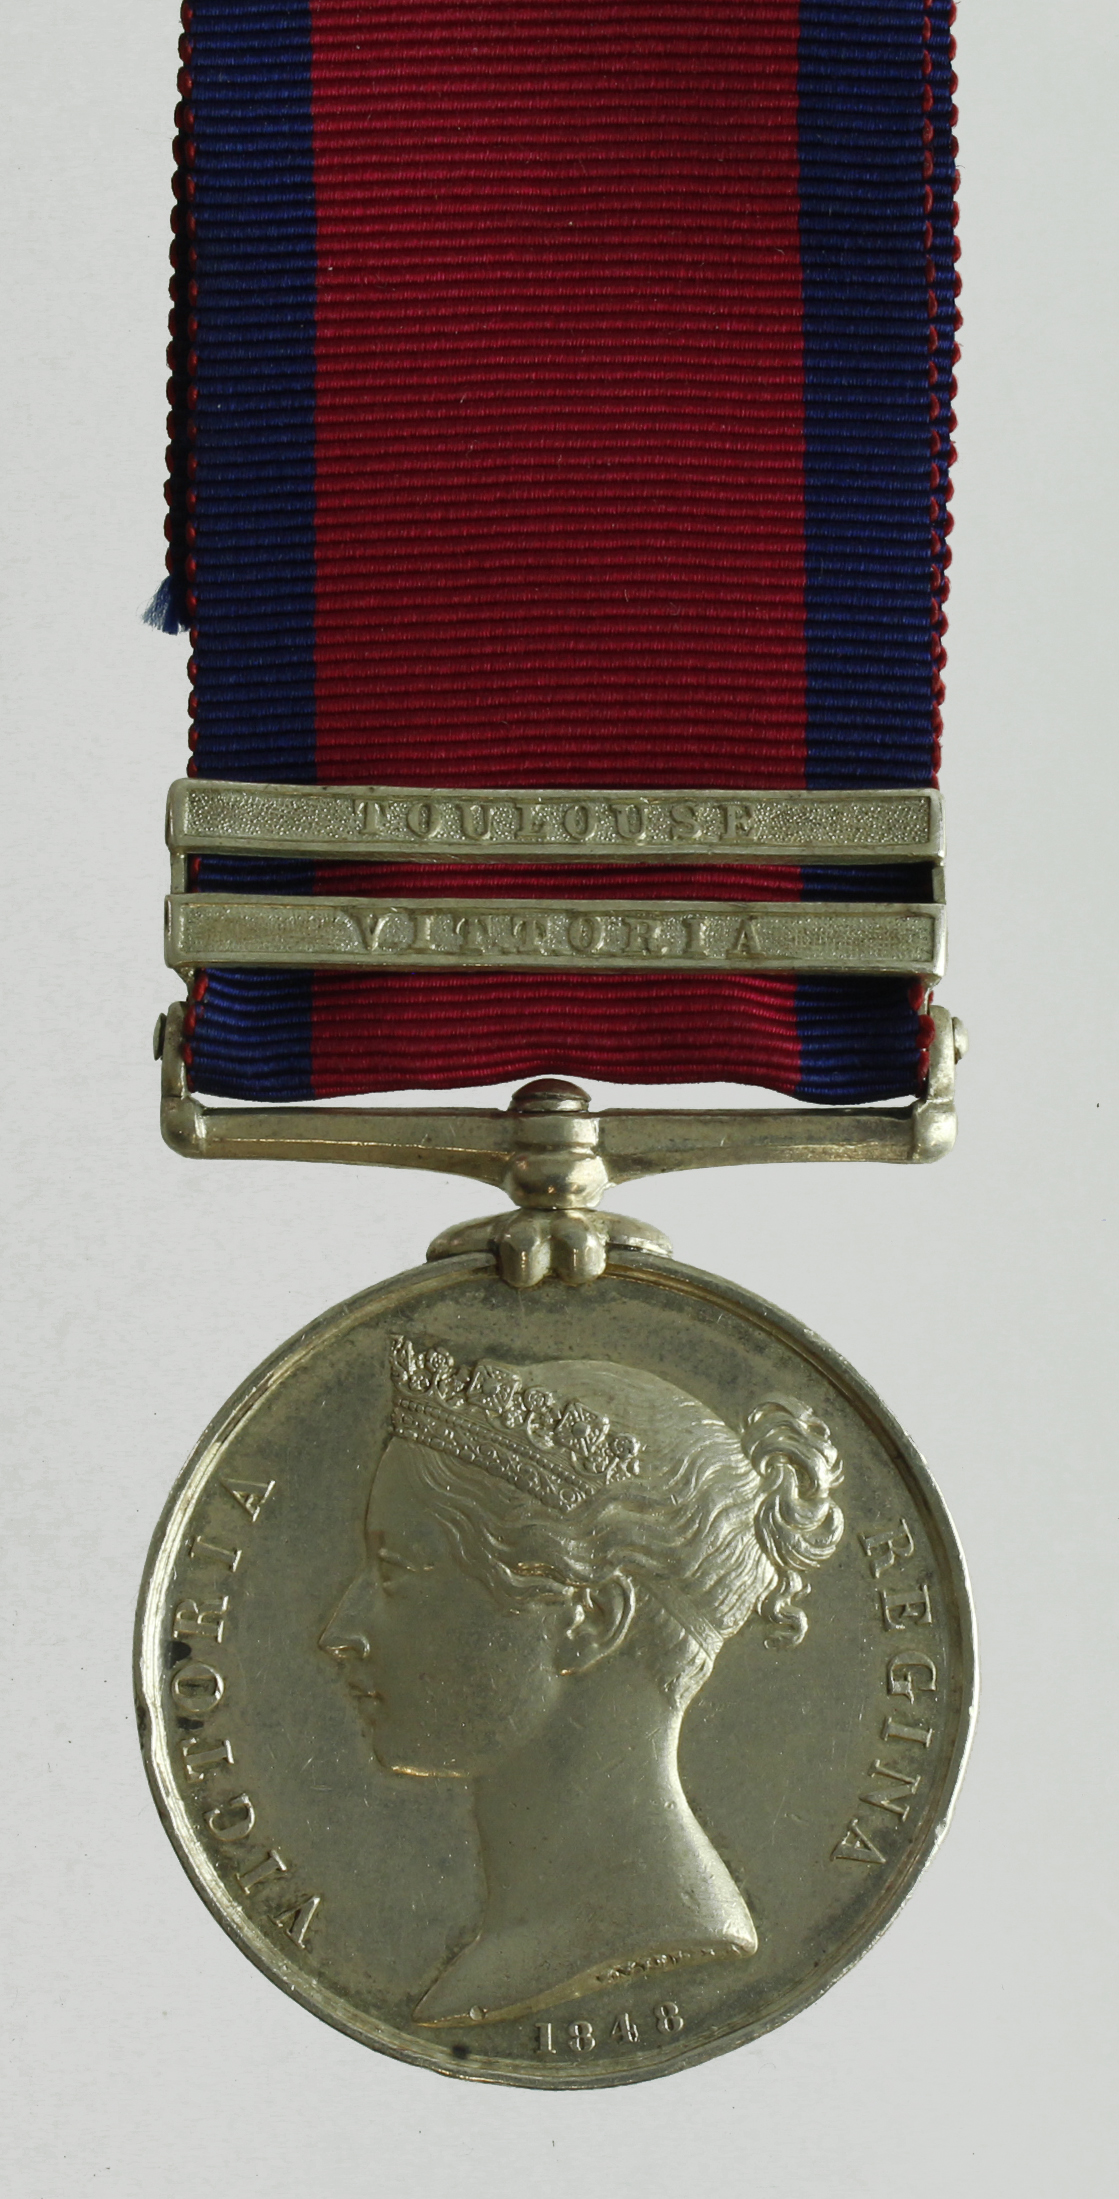 Militray General Service Medal 1848 with bars Vittoria / Toulouse, correctly named (J. Shipman, R.